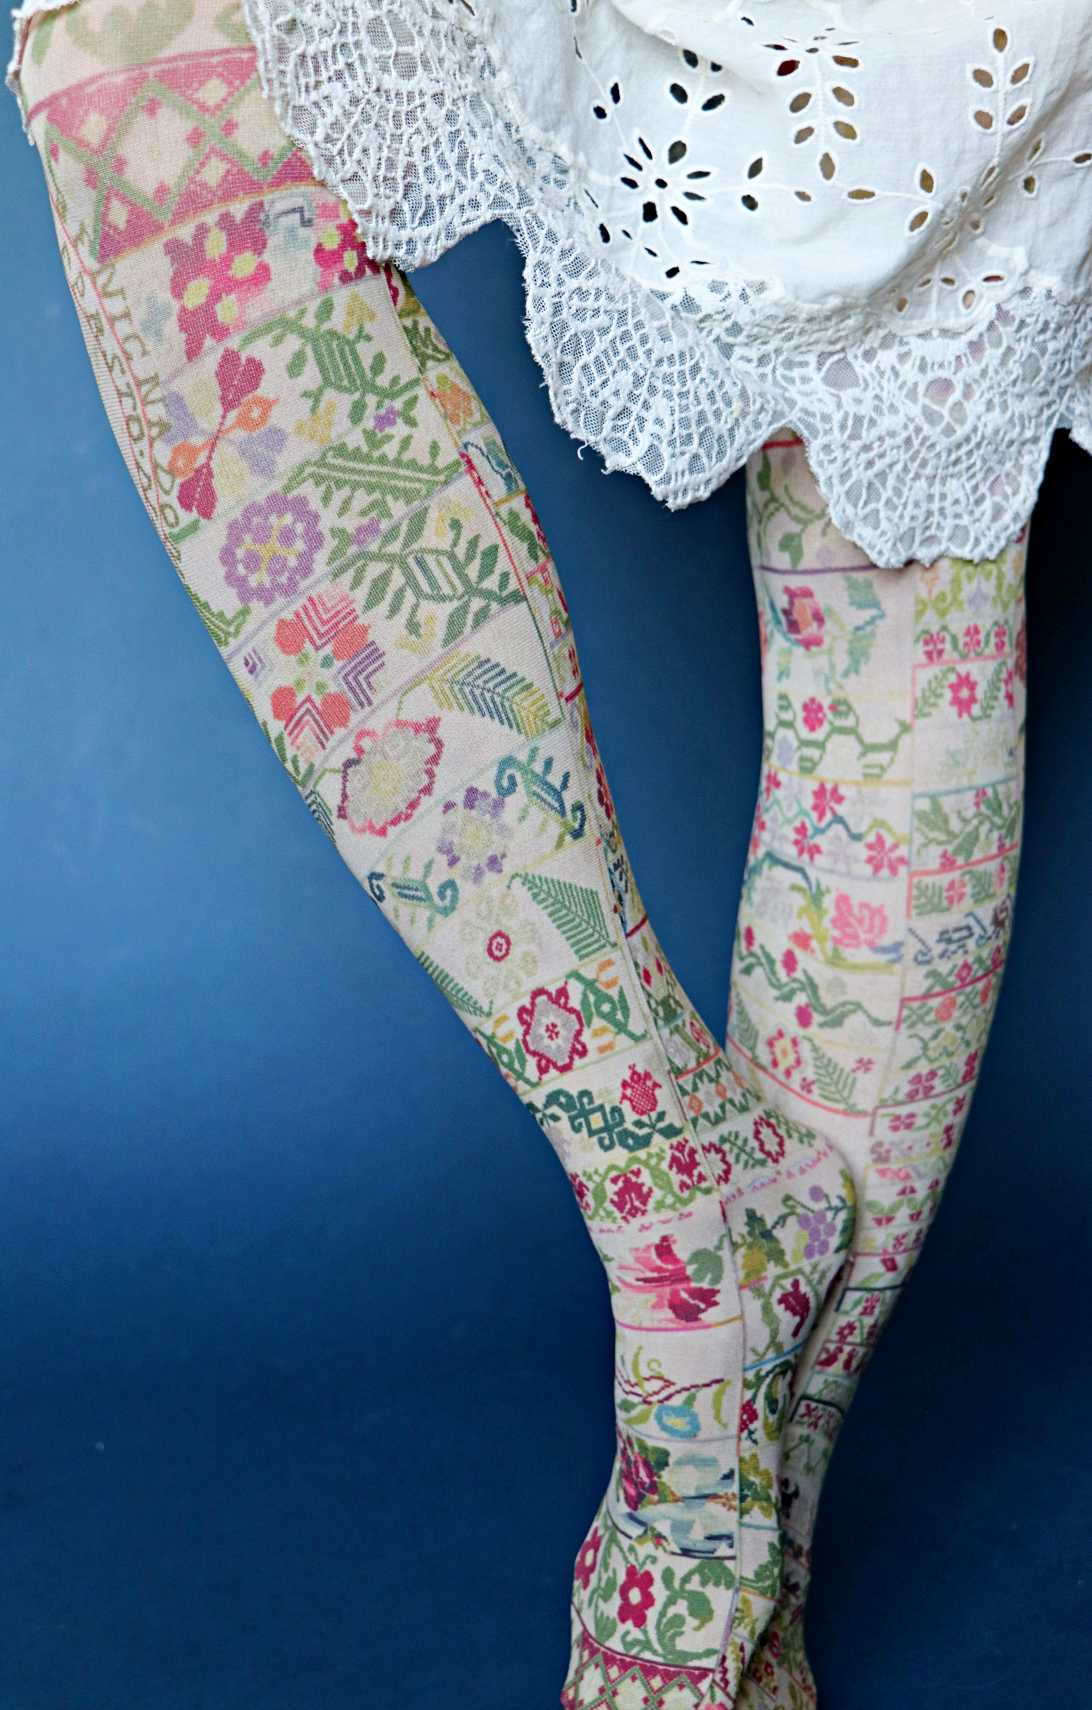 Patterned Tights with Classic Diamond Design